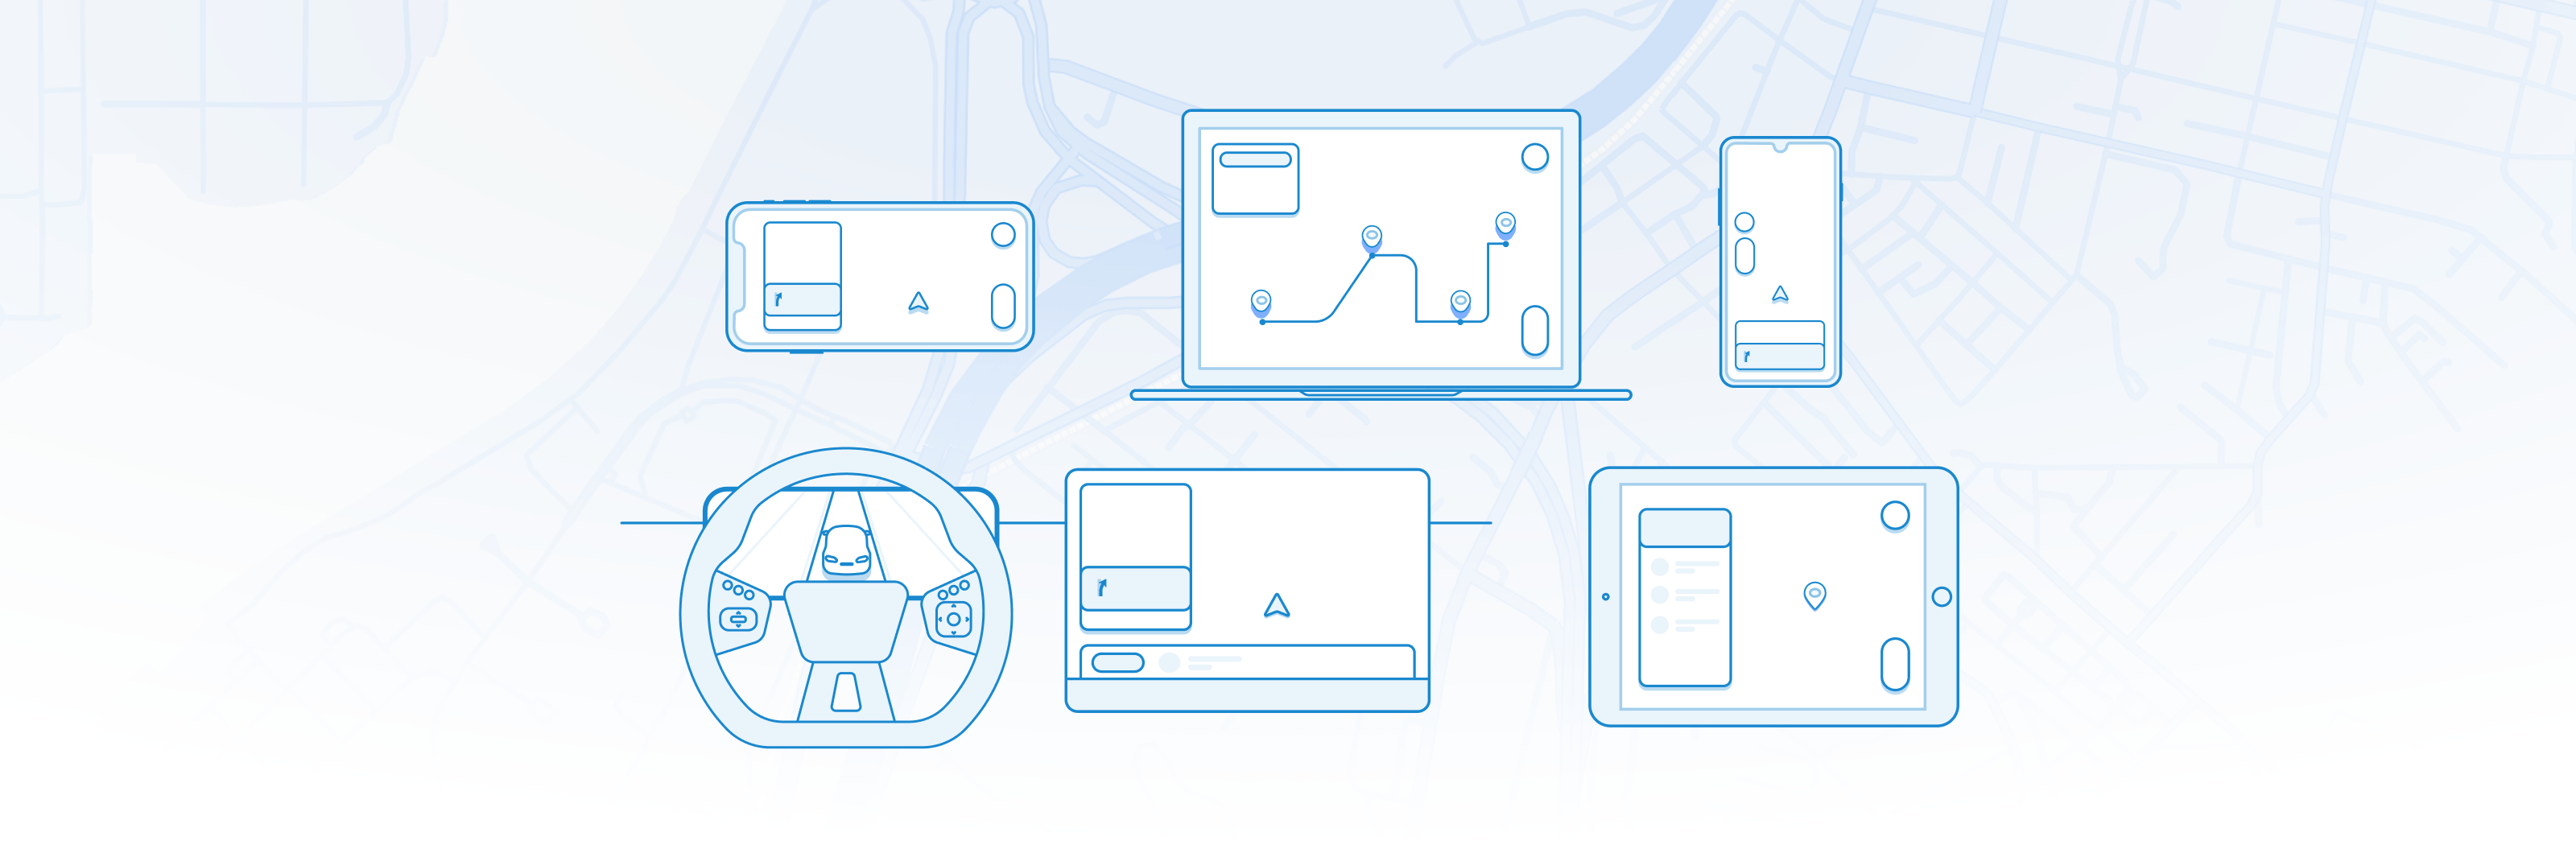 SDKs products wireframes